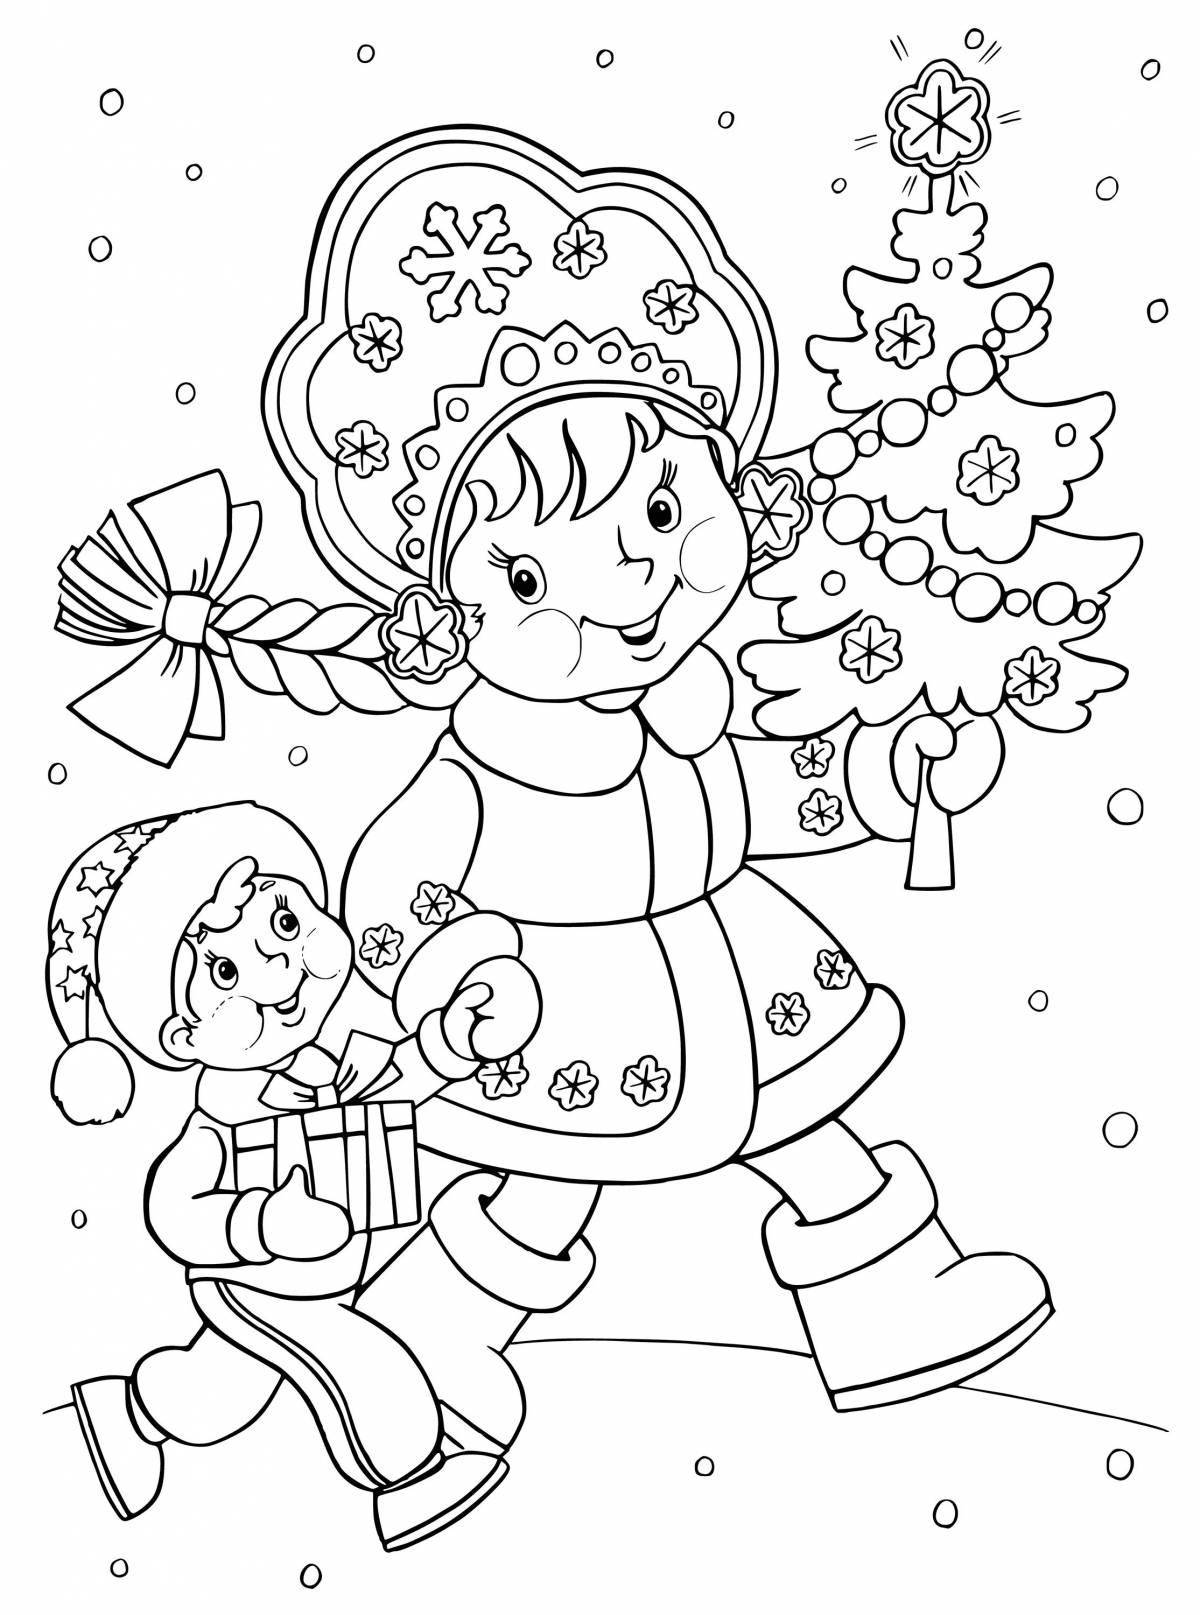 Exquisite snow maiden coloring book for kids